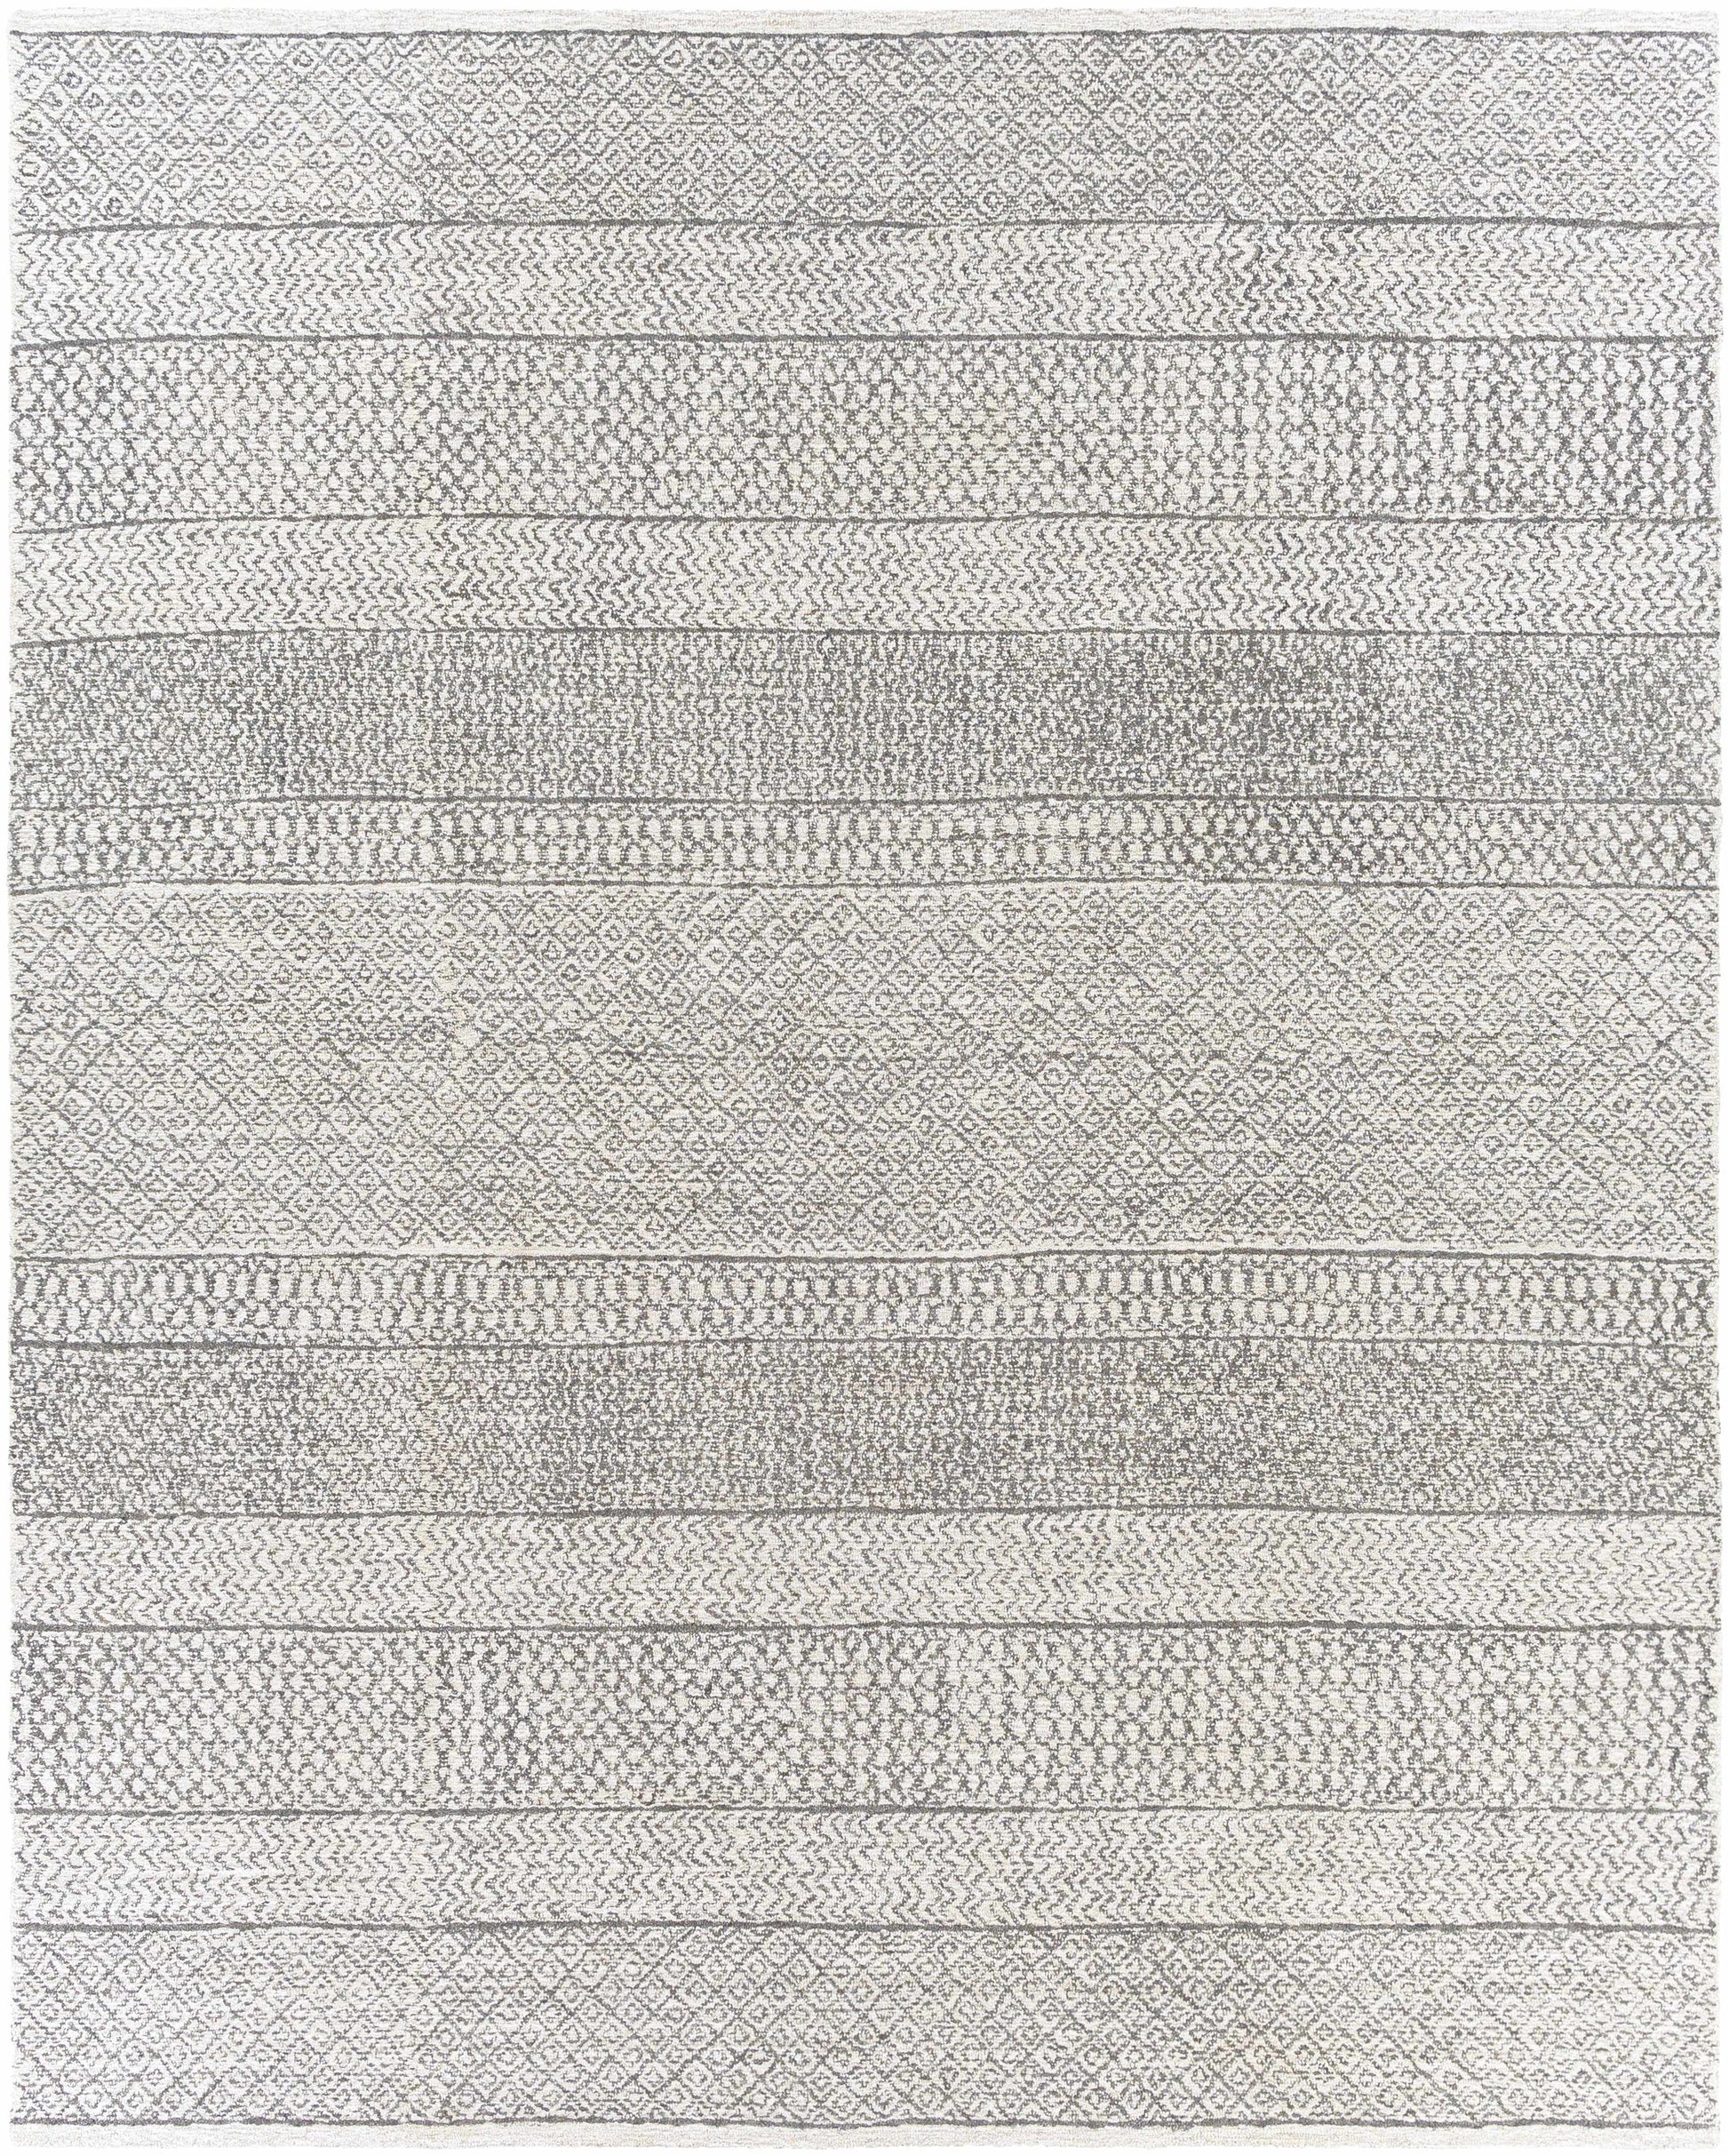 Boutique Rugs Rugs 8' x 10' Rectangle Dugway Tufted Wool Area Rug